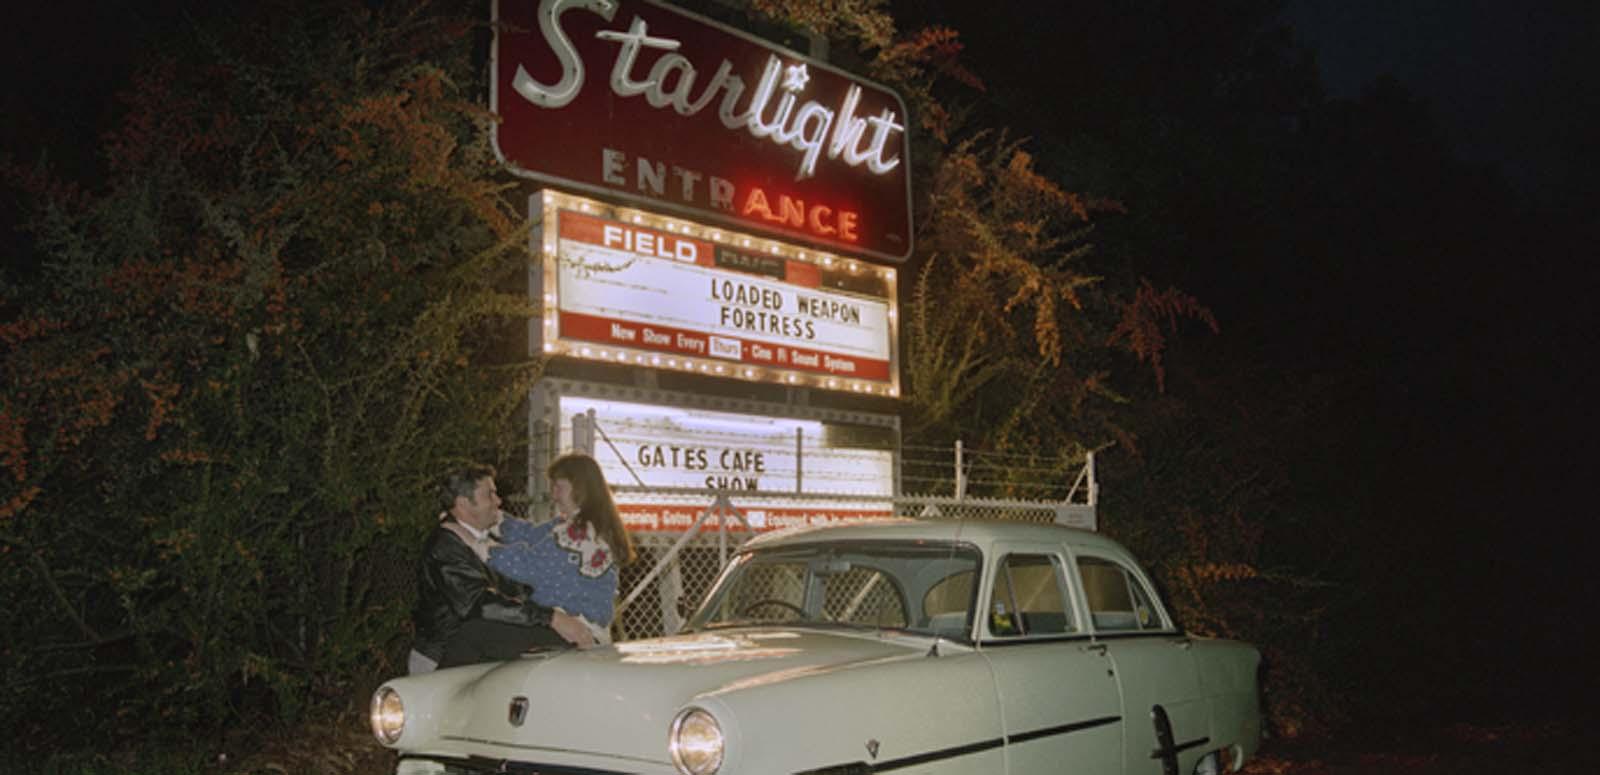 A man and woman embrace outside a drive-in cinema at night, leaning against their car